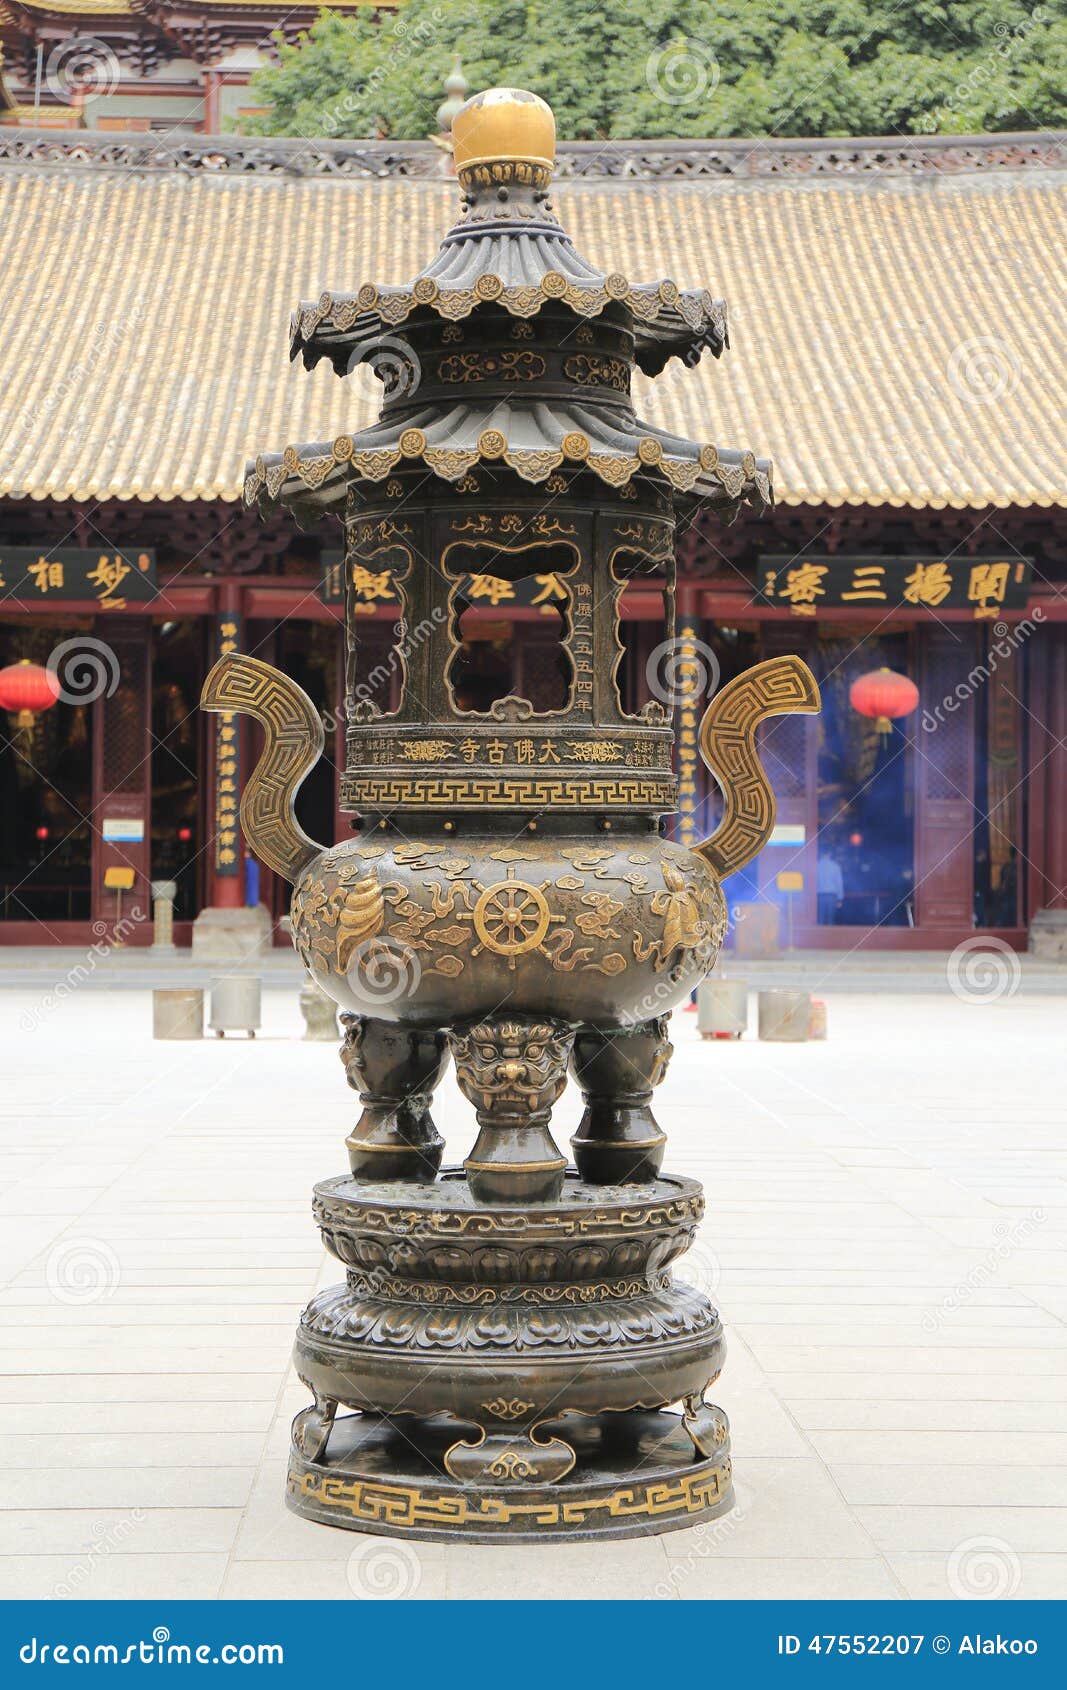 censer in asian chinese temple